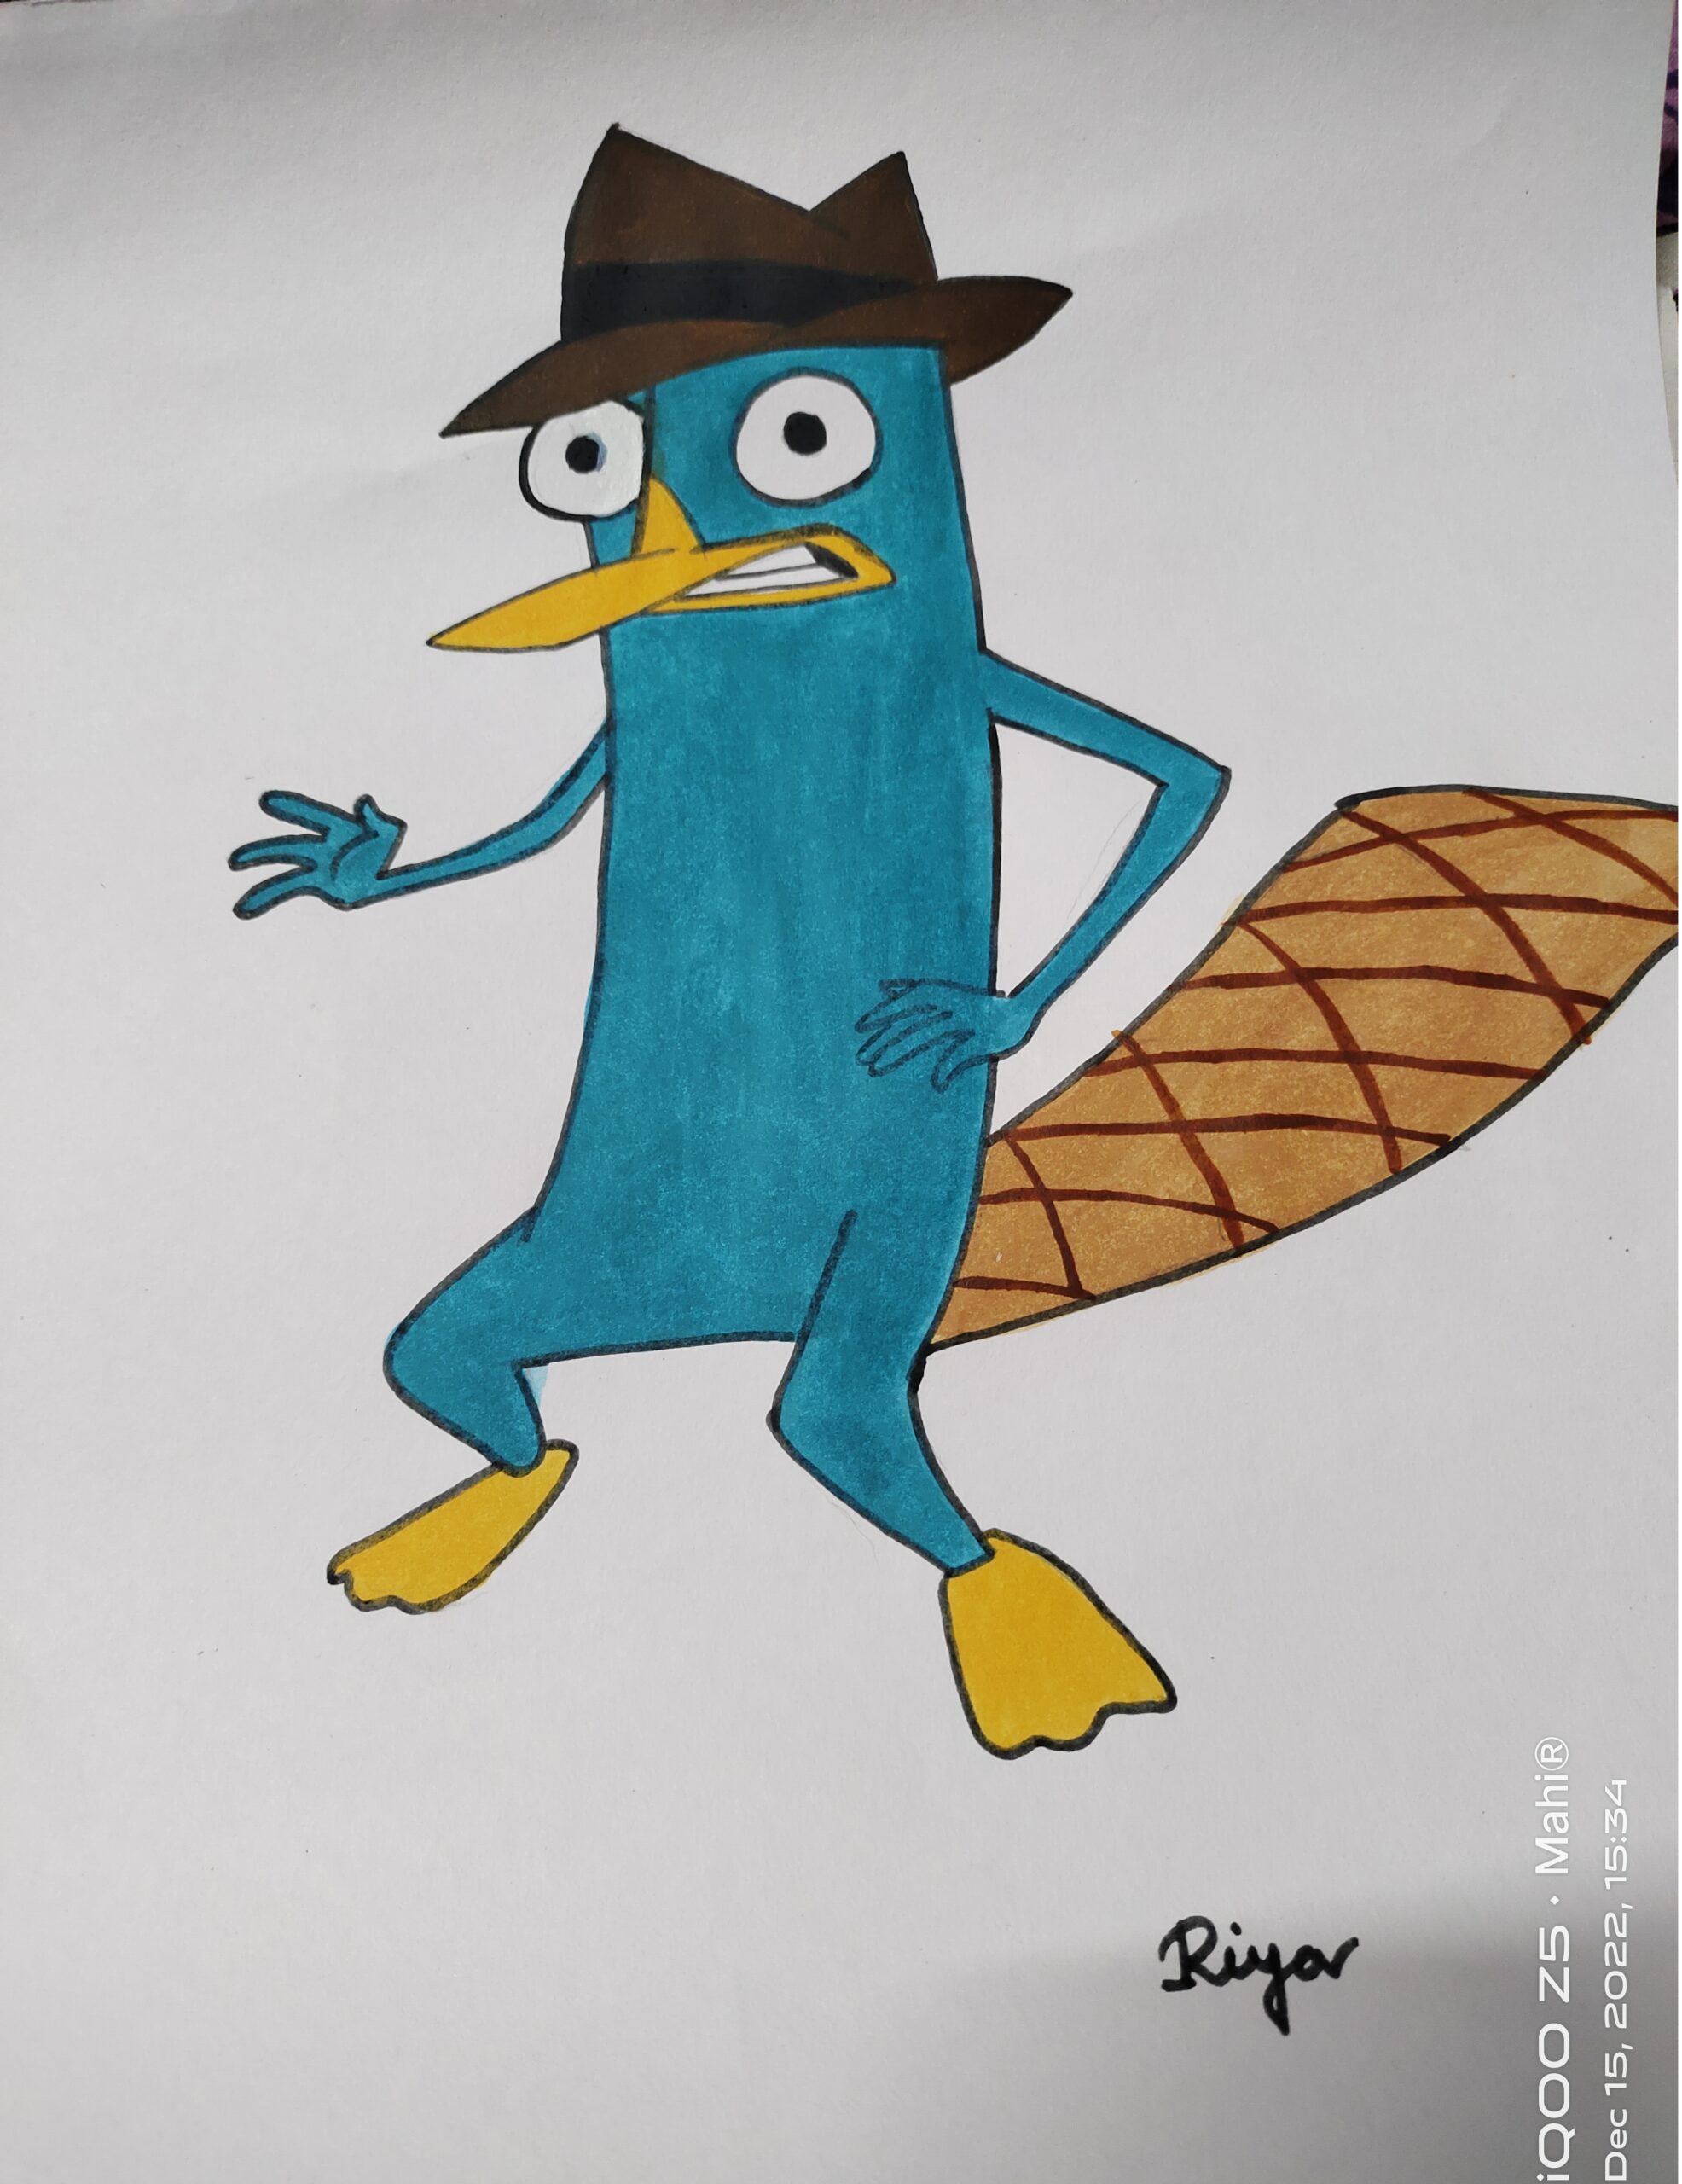 How to draw a Perry the Platypus Step by Step